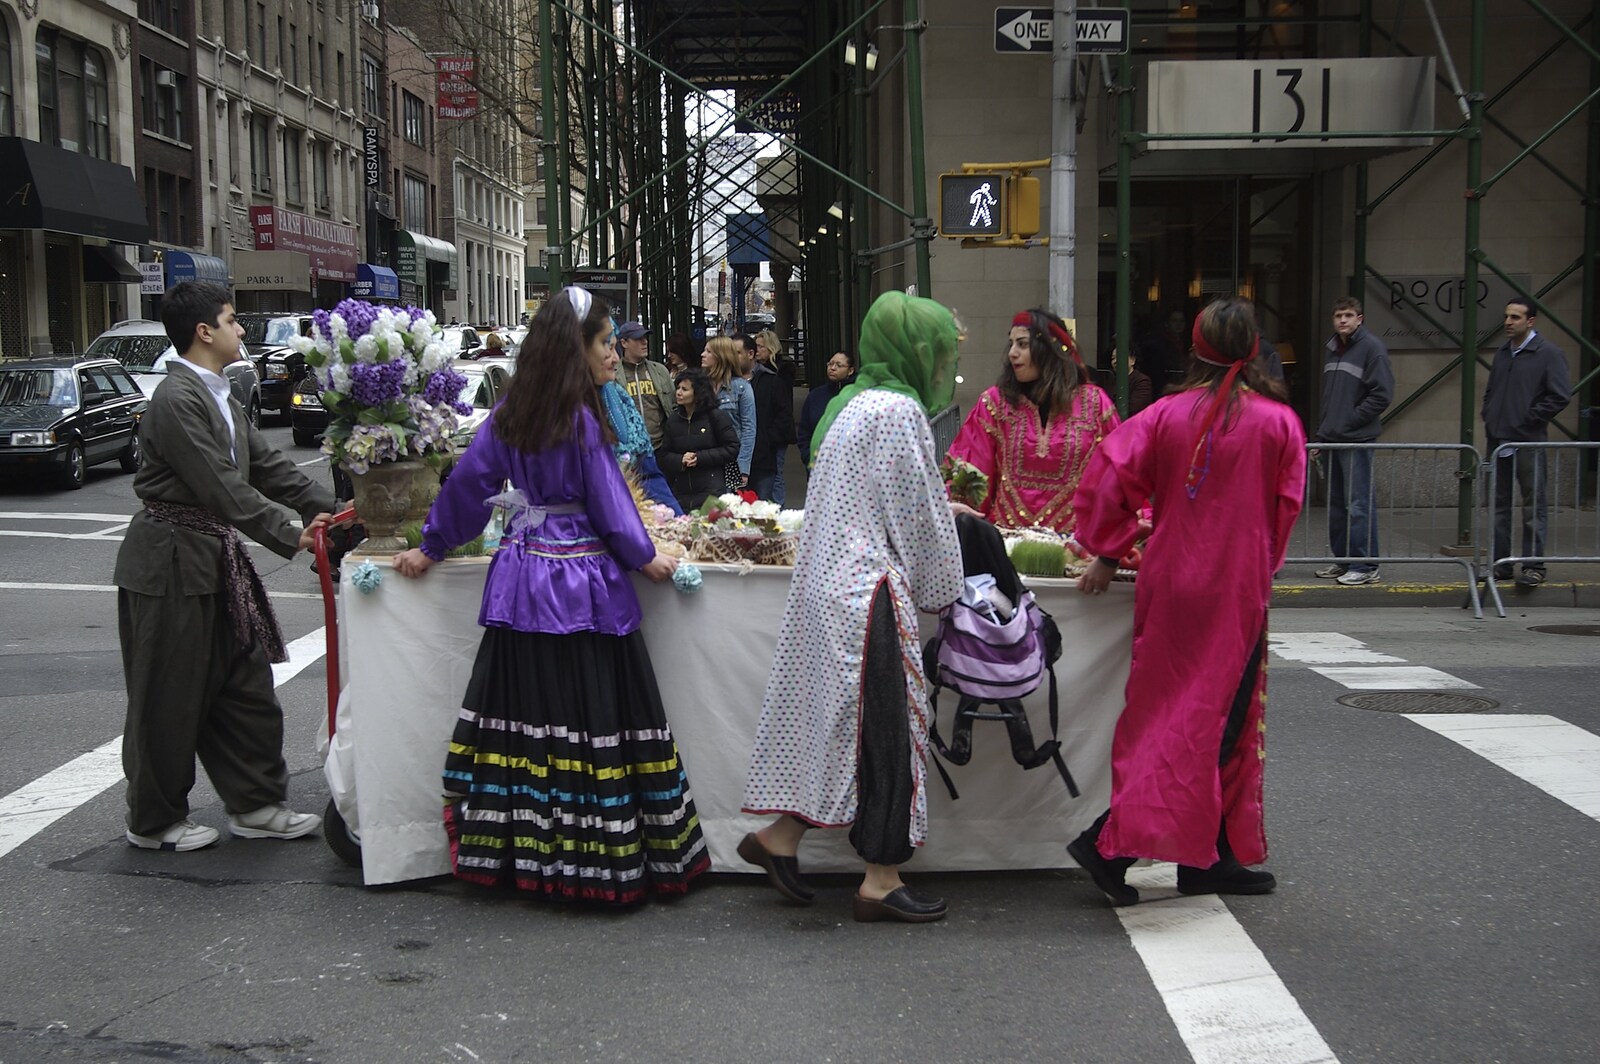 Persian Day Parade, Upper East Side and Midtown, New York, US - 25th March 2007: A table of food is carried around